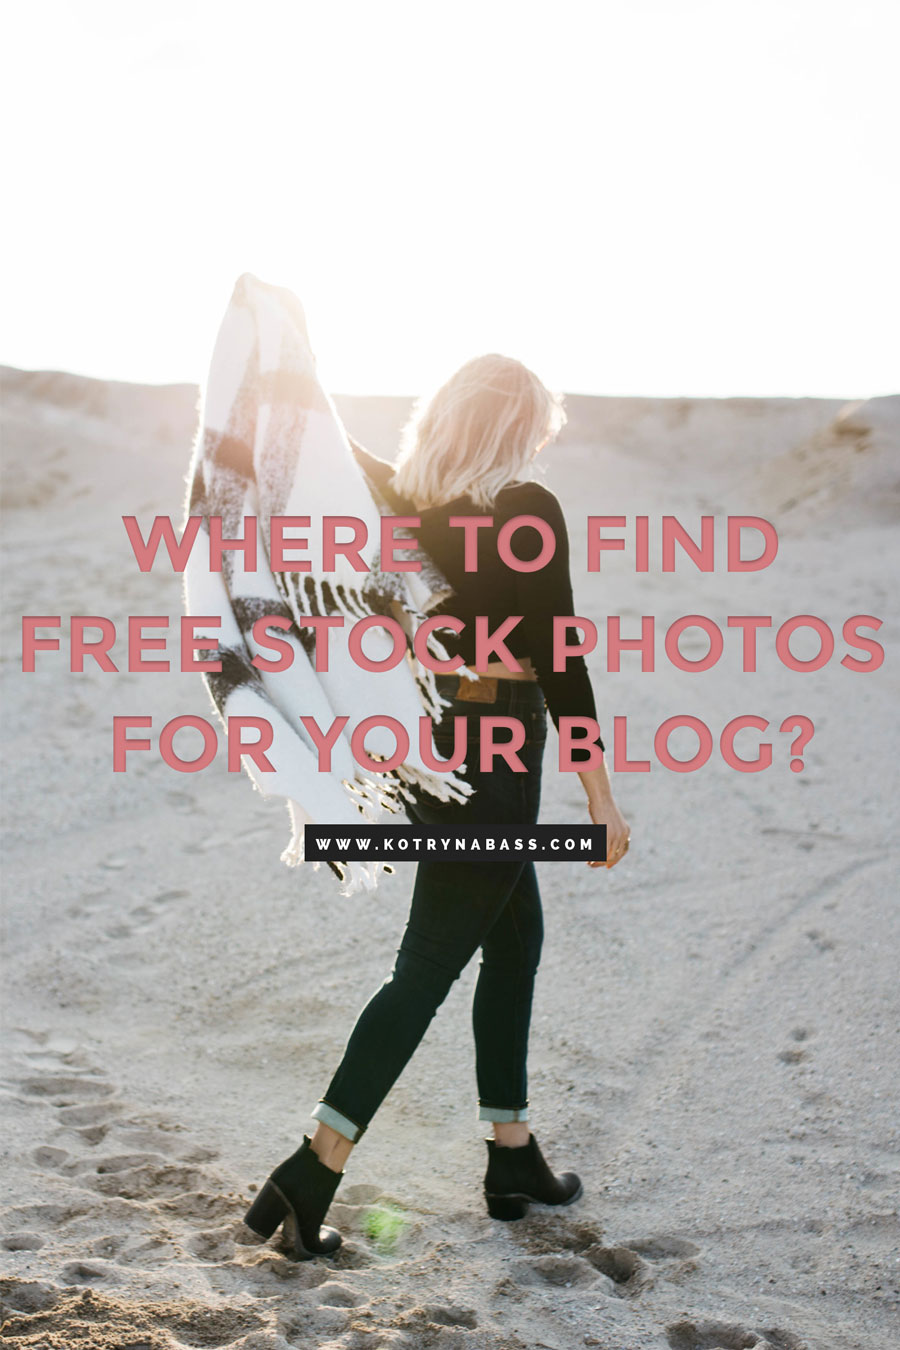 A collection of FREE stock images to help grow your blog + biz!